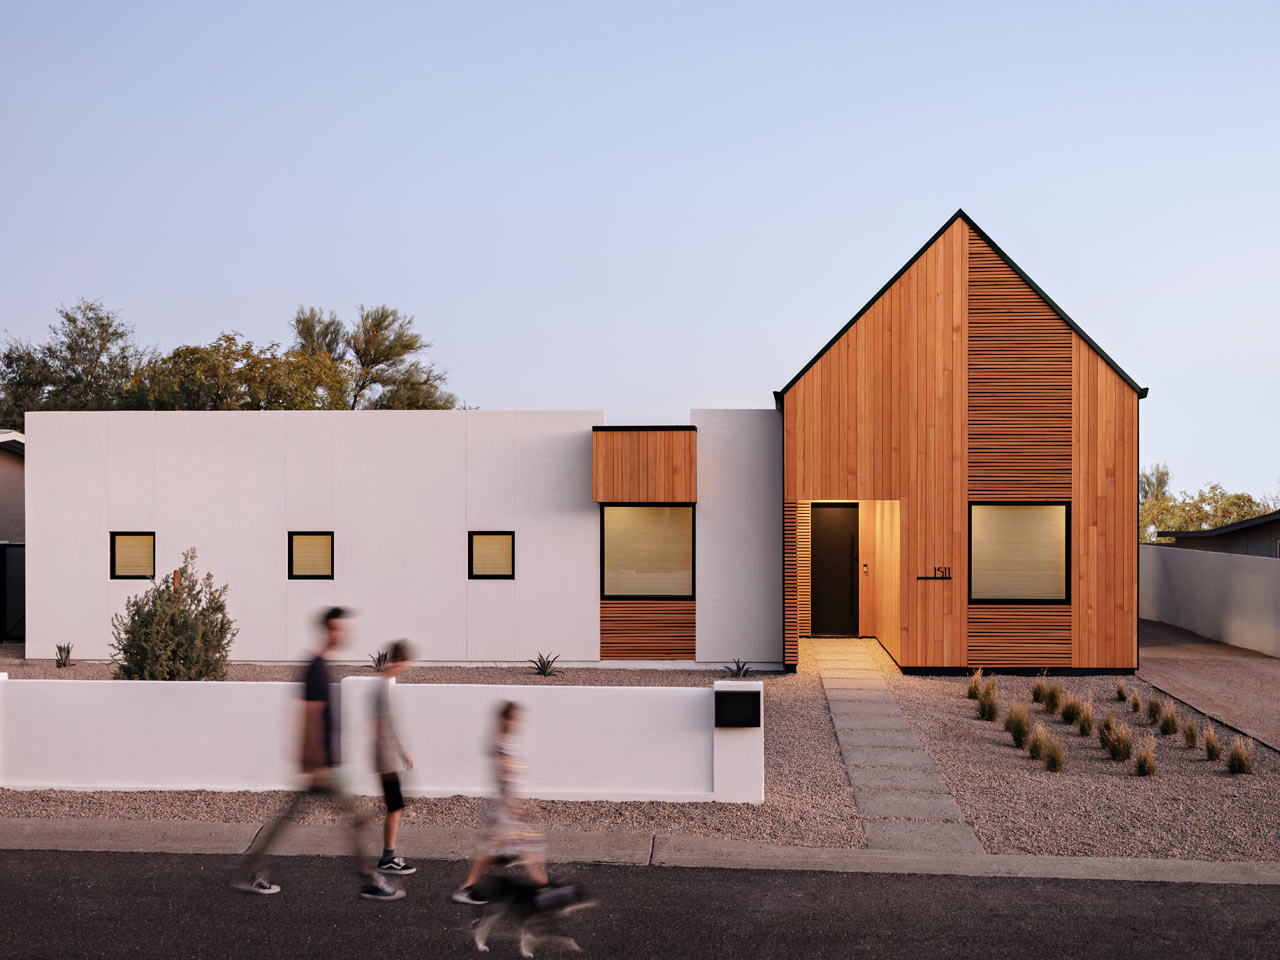 A Gabled Home in Phoenix Inspired by the Majestic Saguaro Cactus